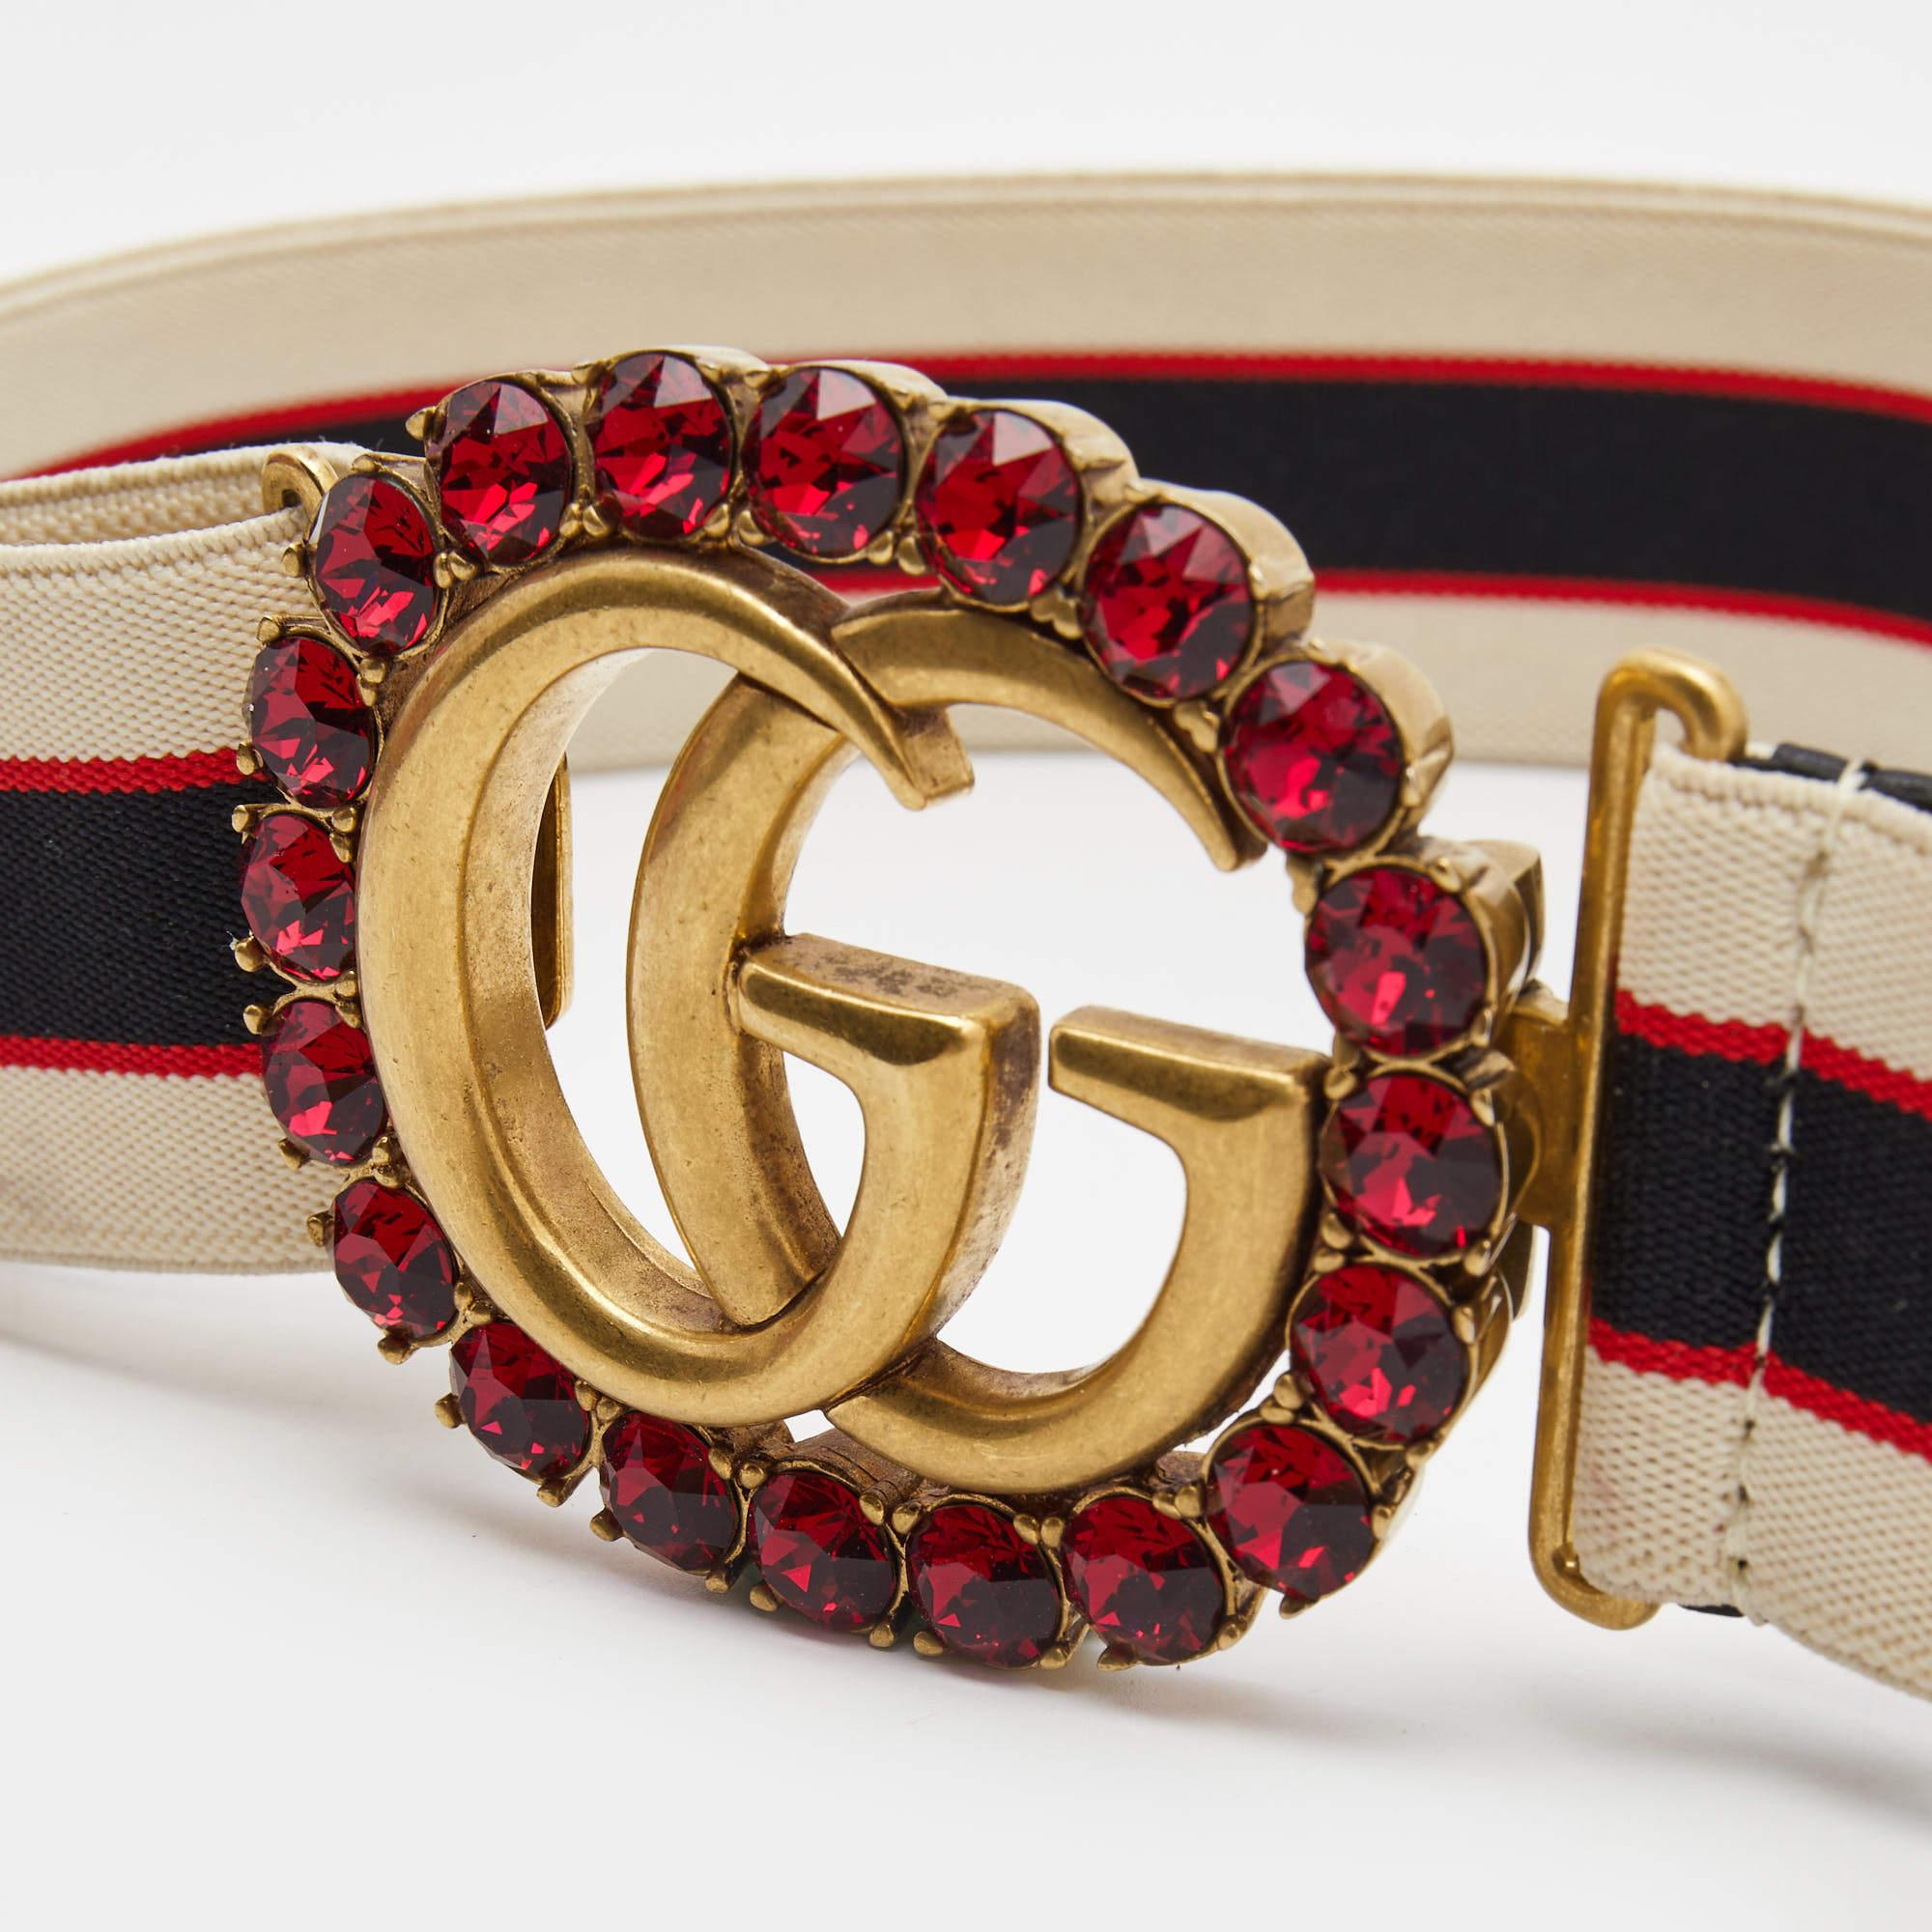 A classic add-on to your collection of belts is this Gucci piece. Cut to a convenient length, the belt has a smooth finish and a sturdy built. This wardrobe essential piece will continually complement your style.

